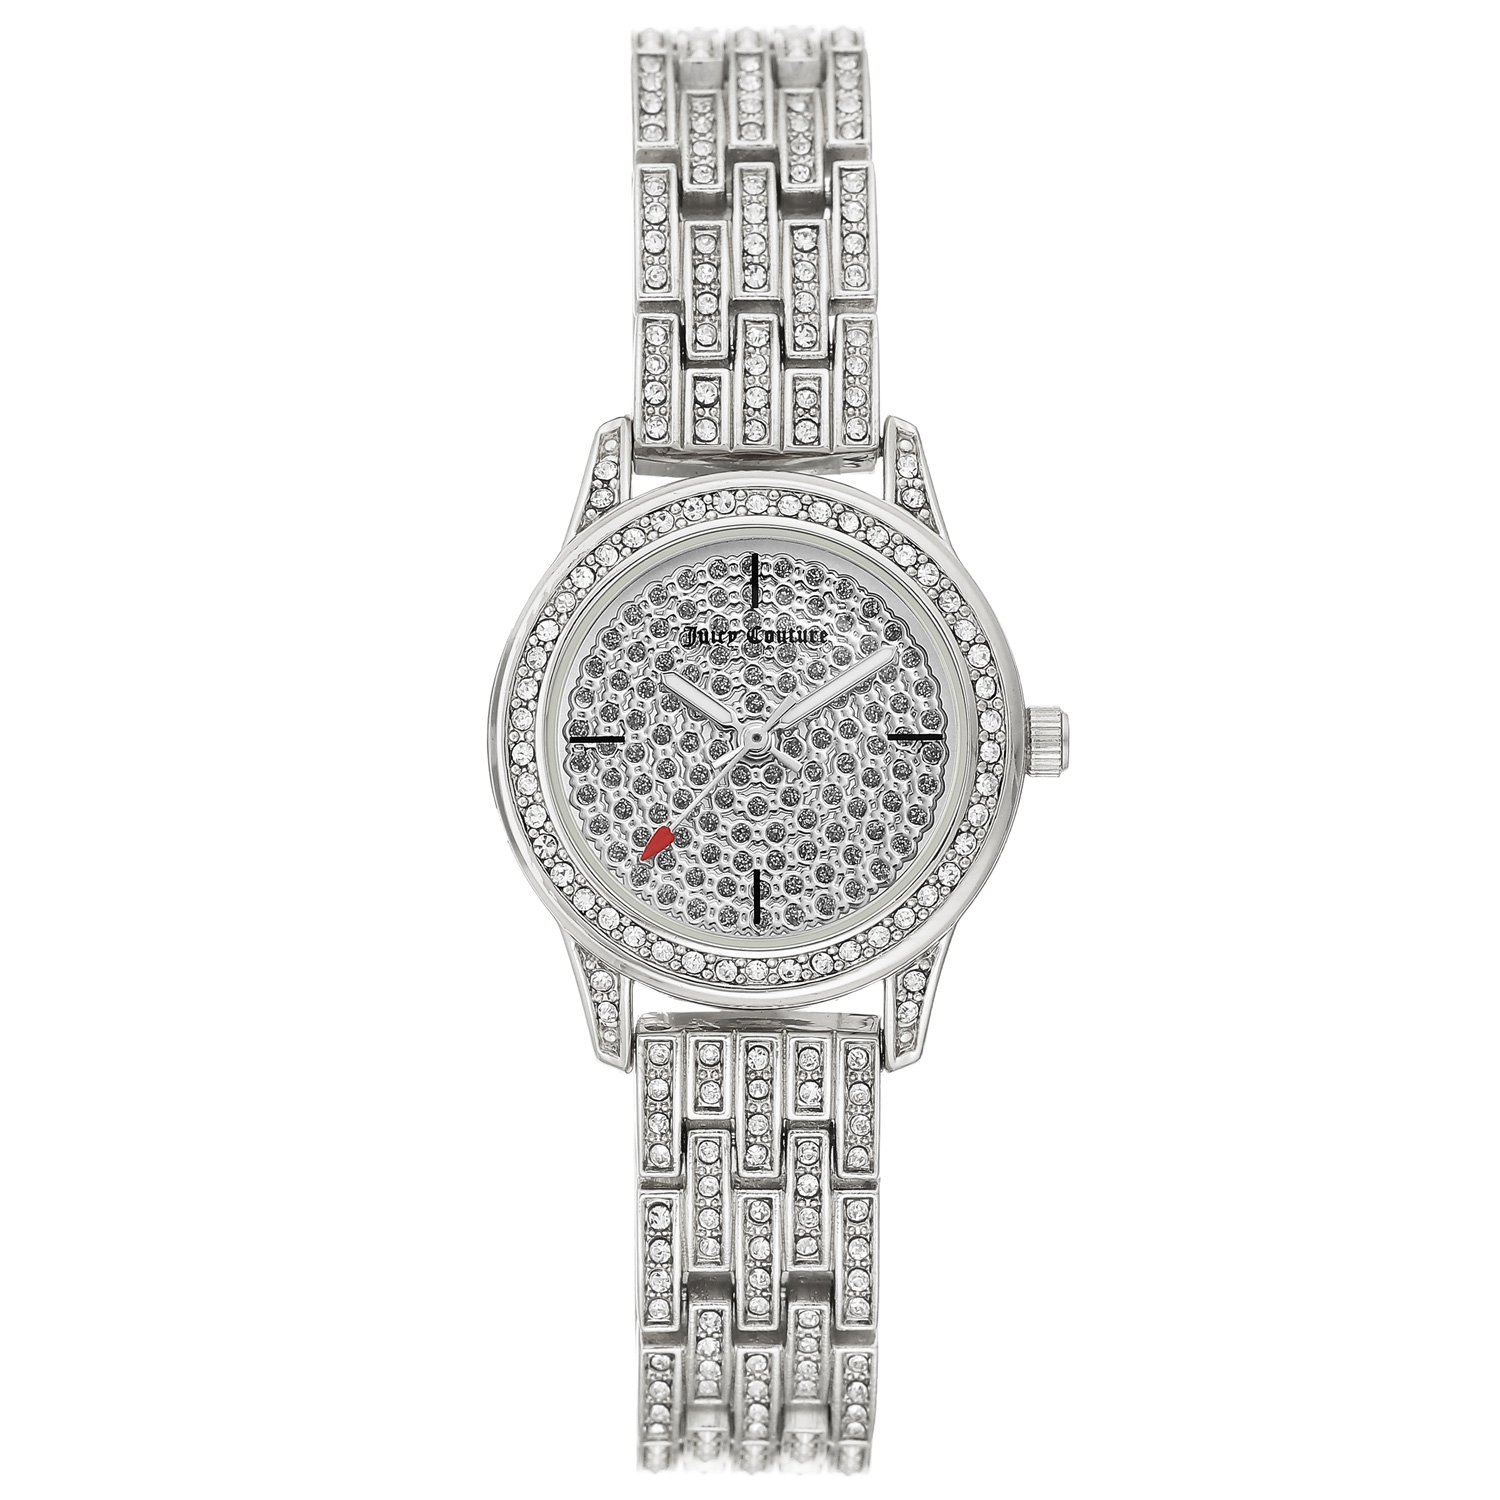 Juicy Couture Women's Watch Silver JC/1144PVSV